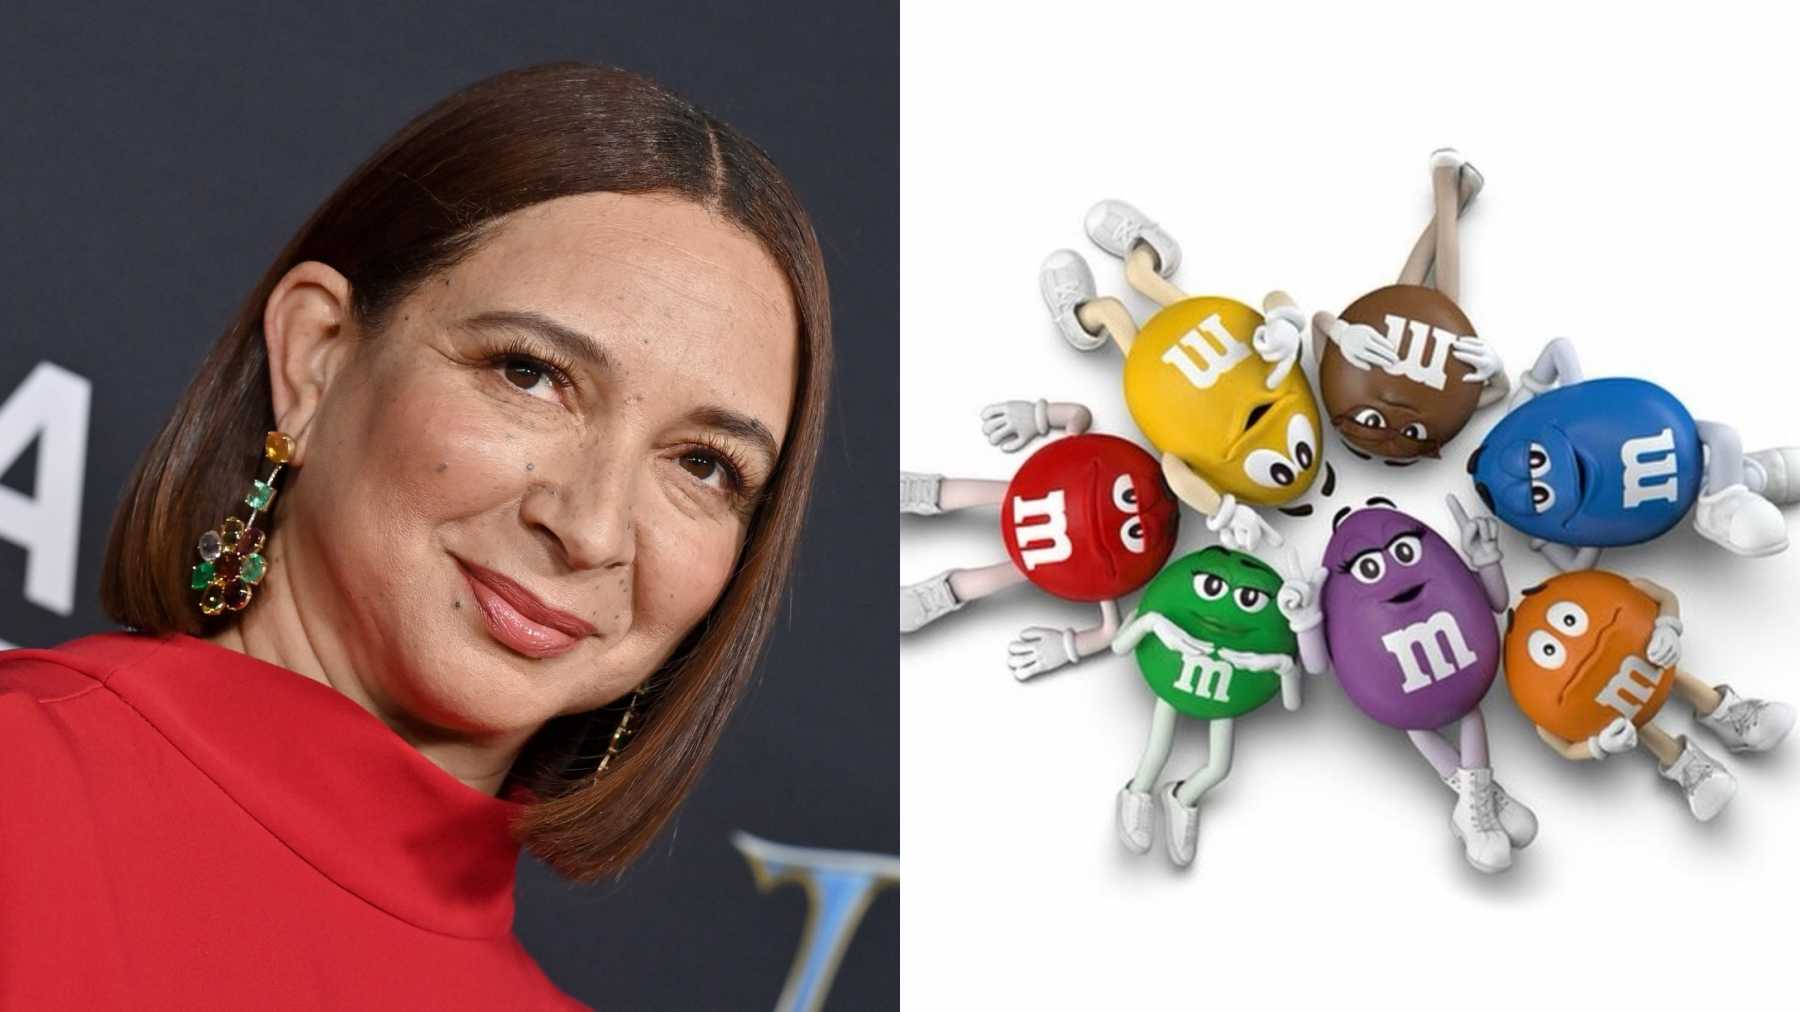 Twitter Users Hilariously Pan 'Inclusive' M&M's Rebrand That